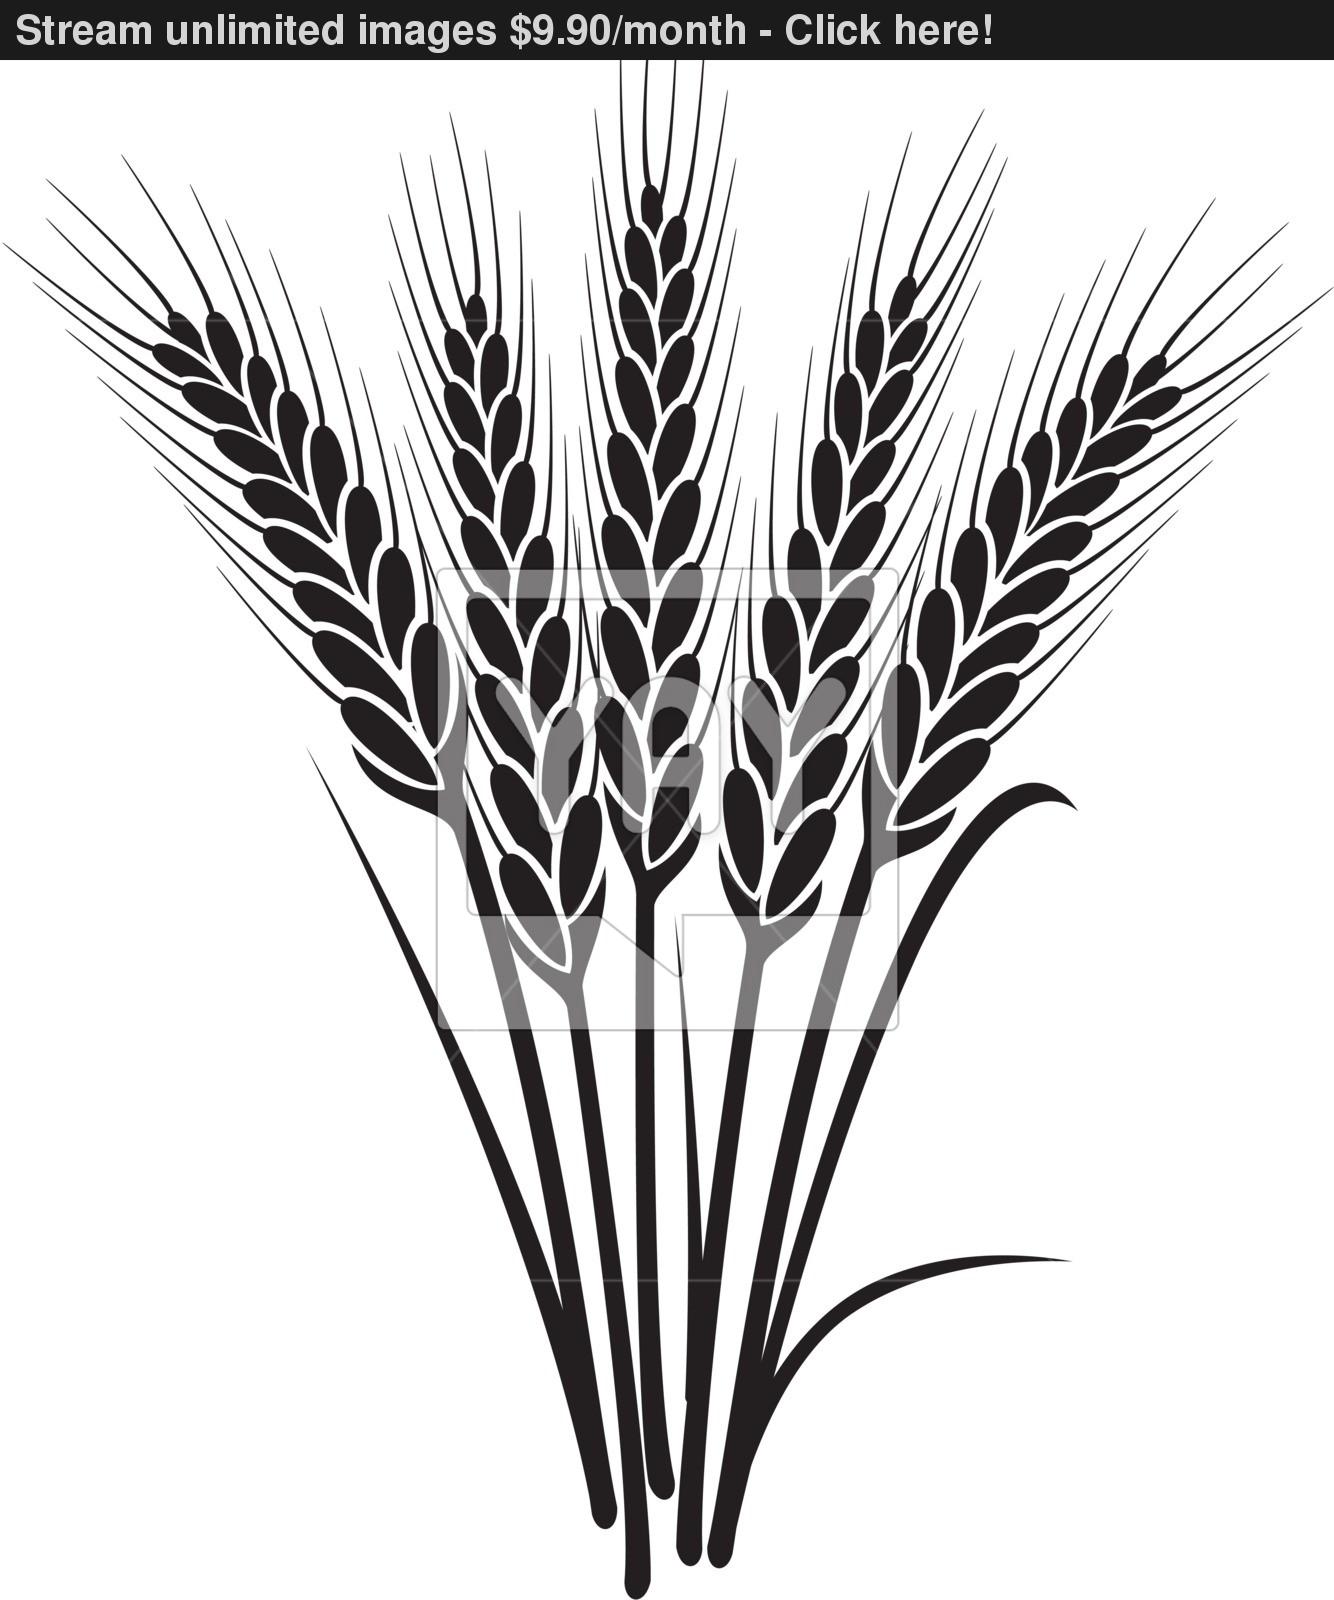 Wheat Clipart Black And White Wheat Stalk Vector Wheat Stalk Field Of